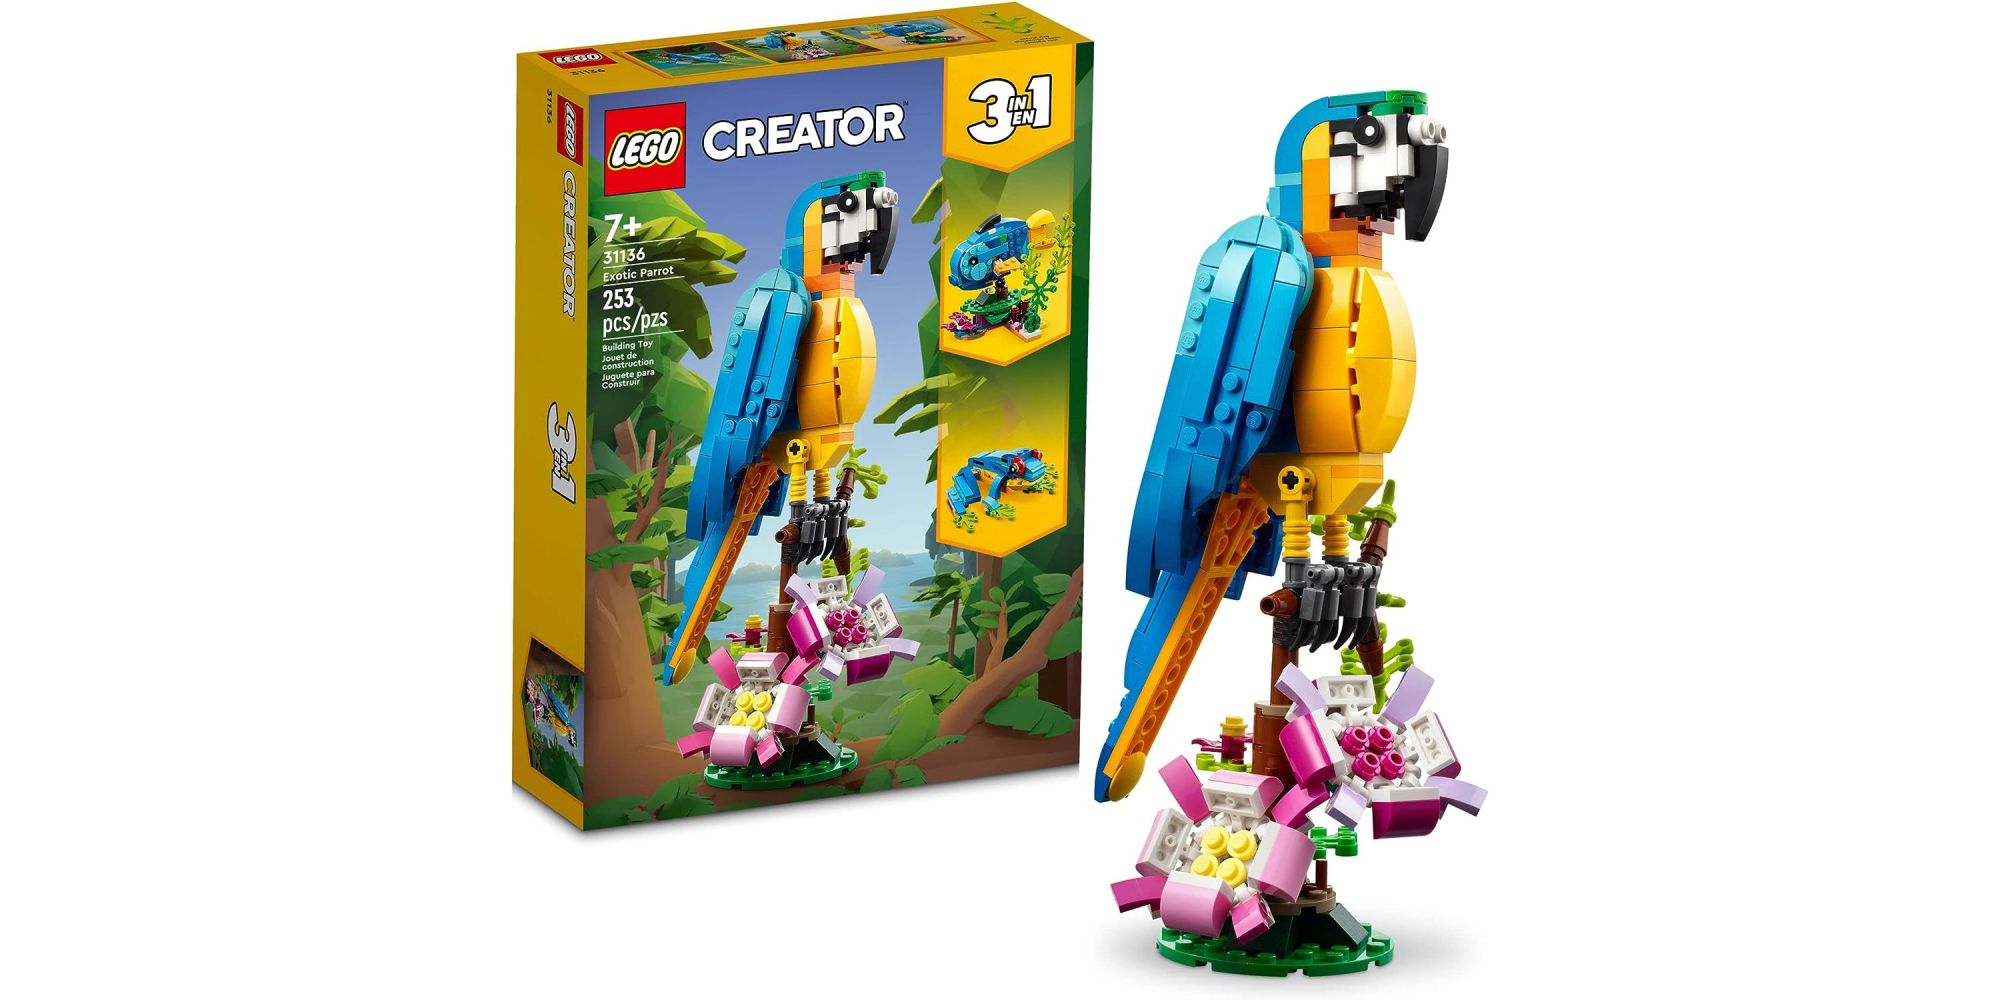 LEGO Creator 3-in-1 Exotic Parrot box and the Exotic Parrot itself (fully built)